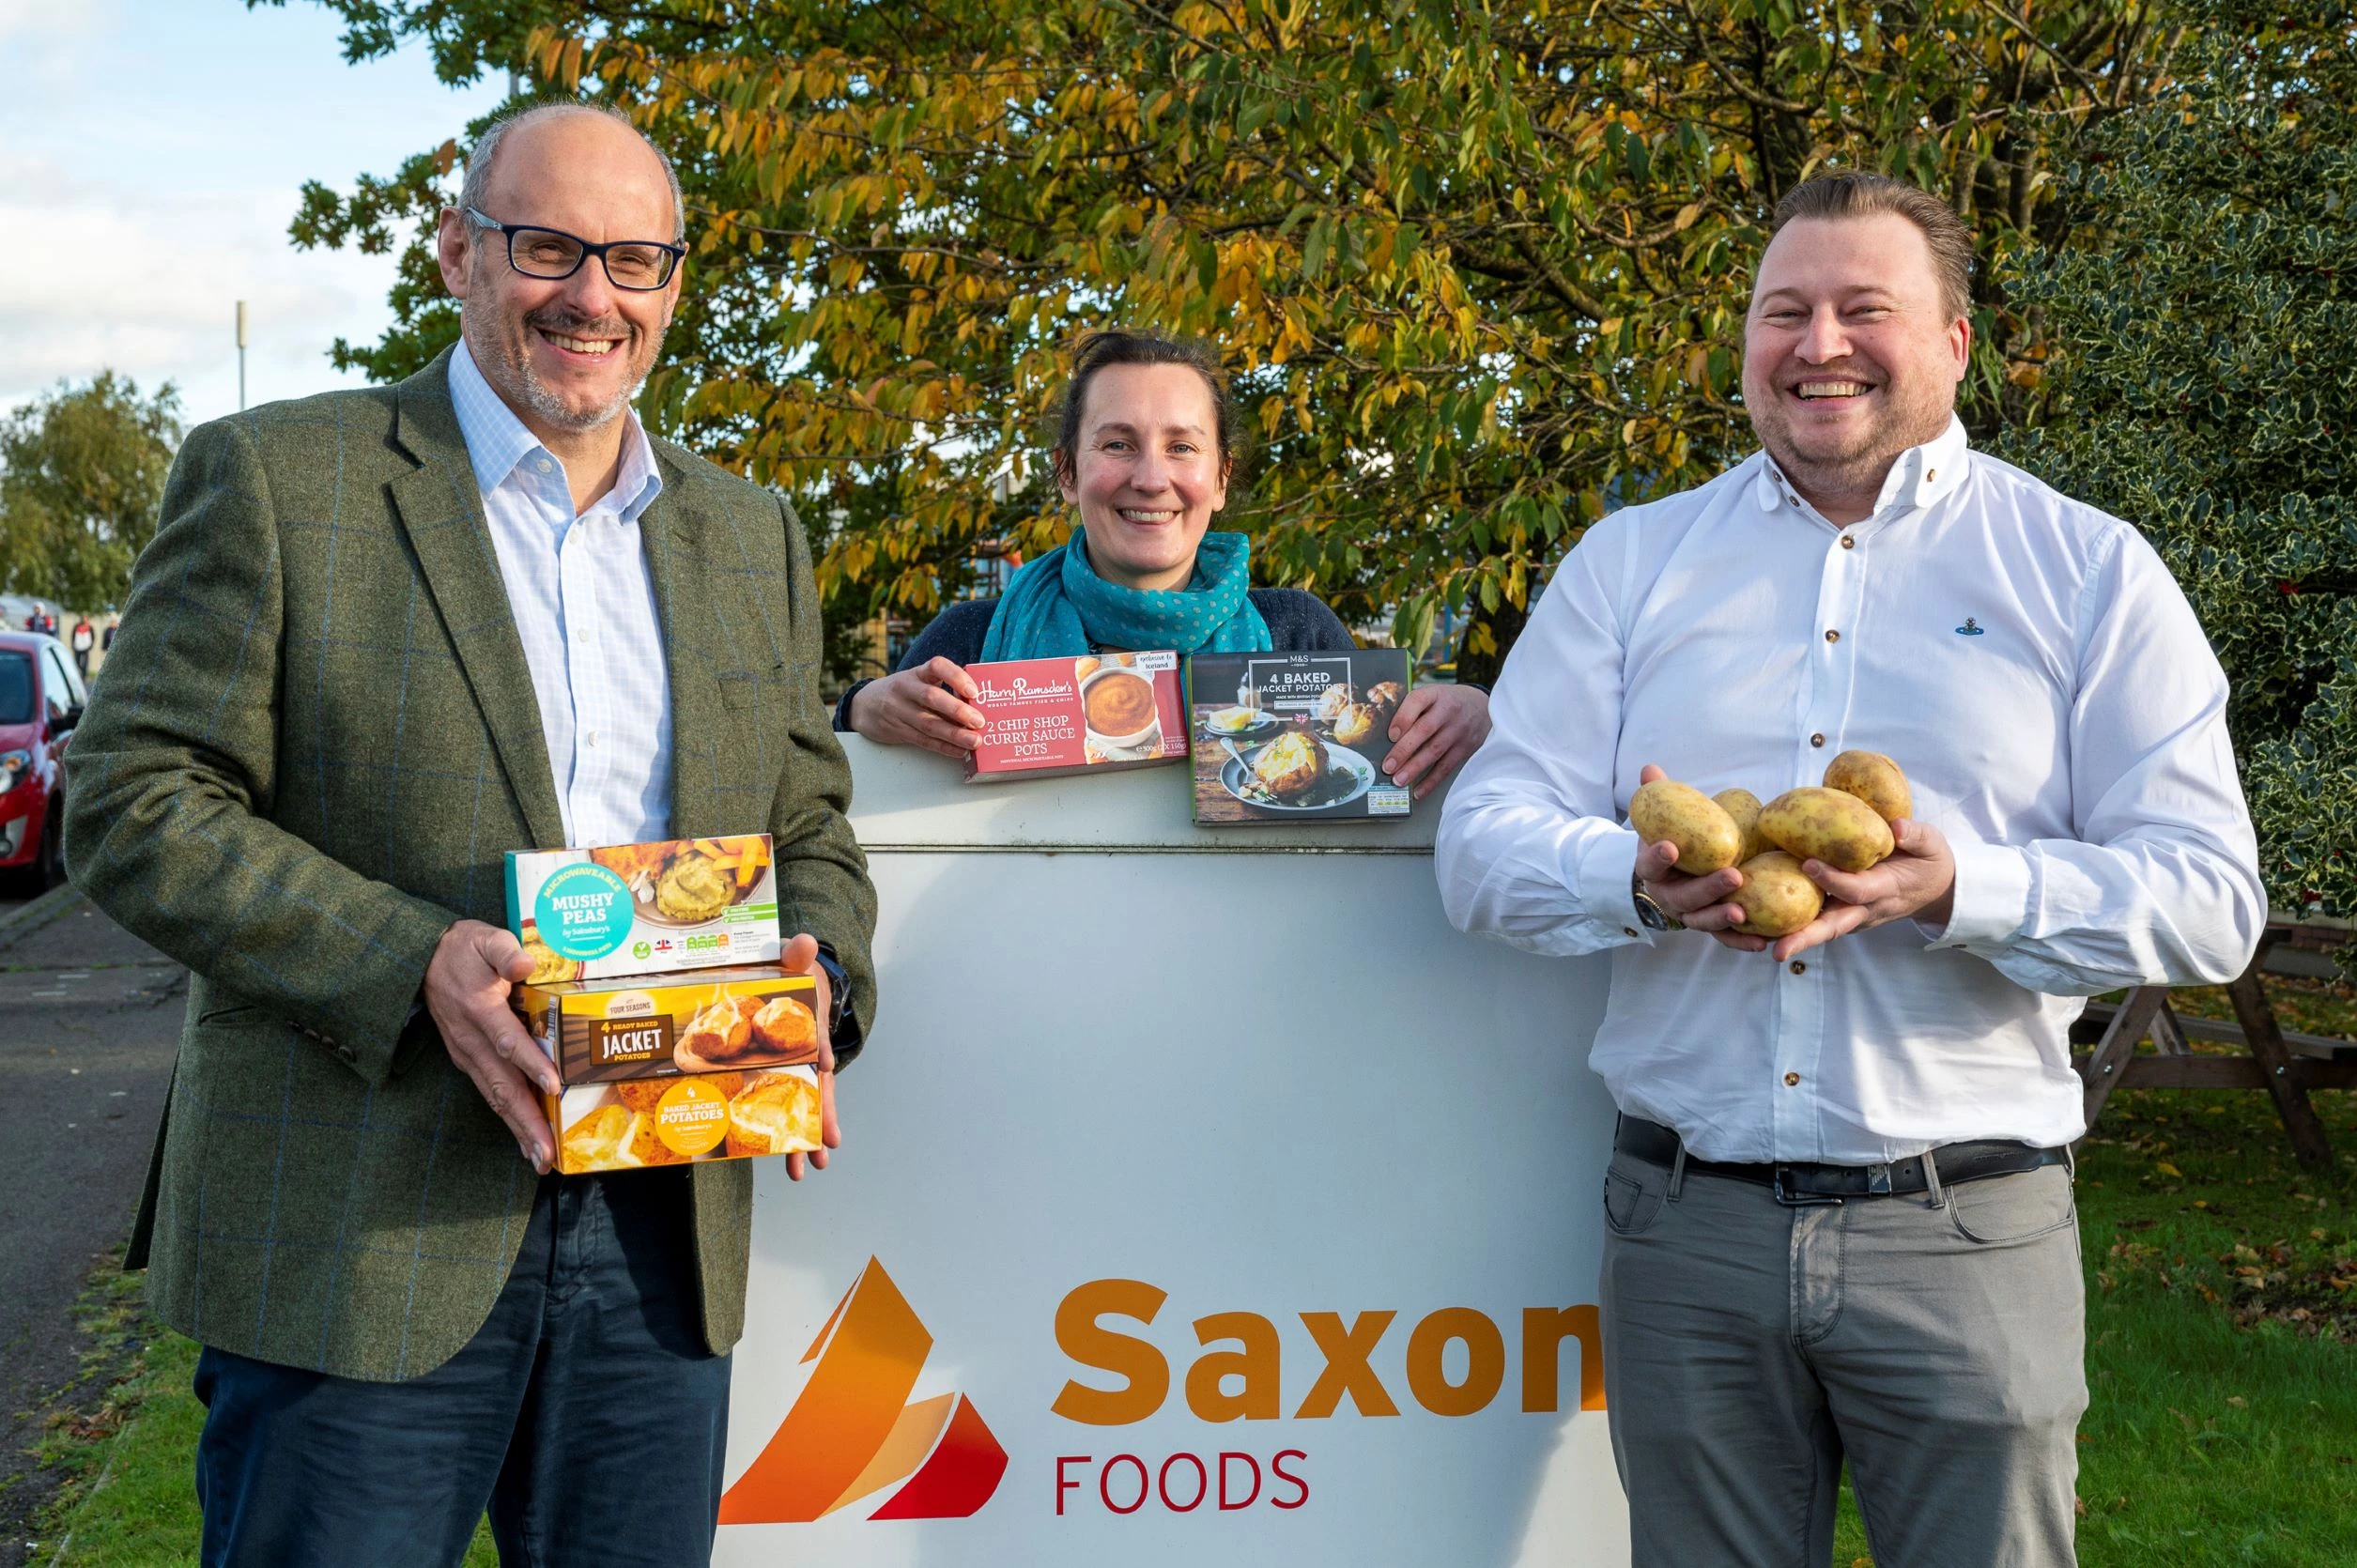 (L -R): Andrew Hayes, managing director of Abbeydale Food Group; Vicky Wake, general manager of Saxon Foods; and Steven Humphrey, managing director of Tuber Group.